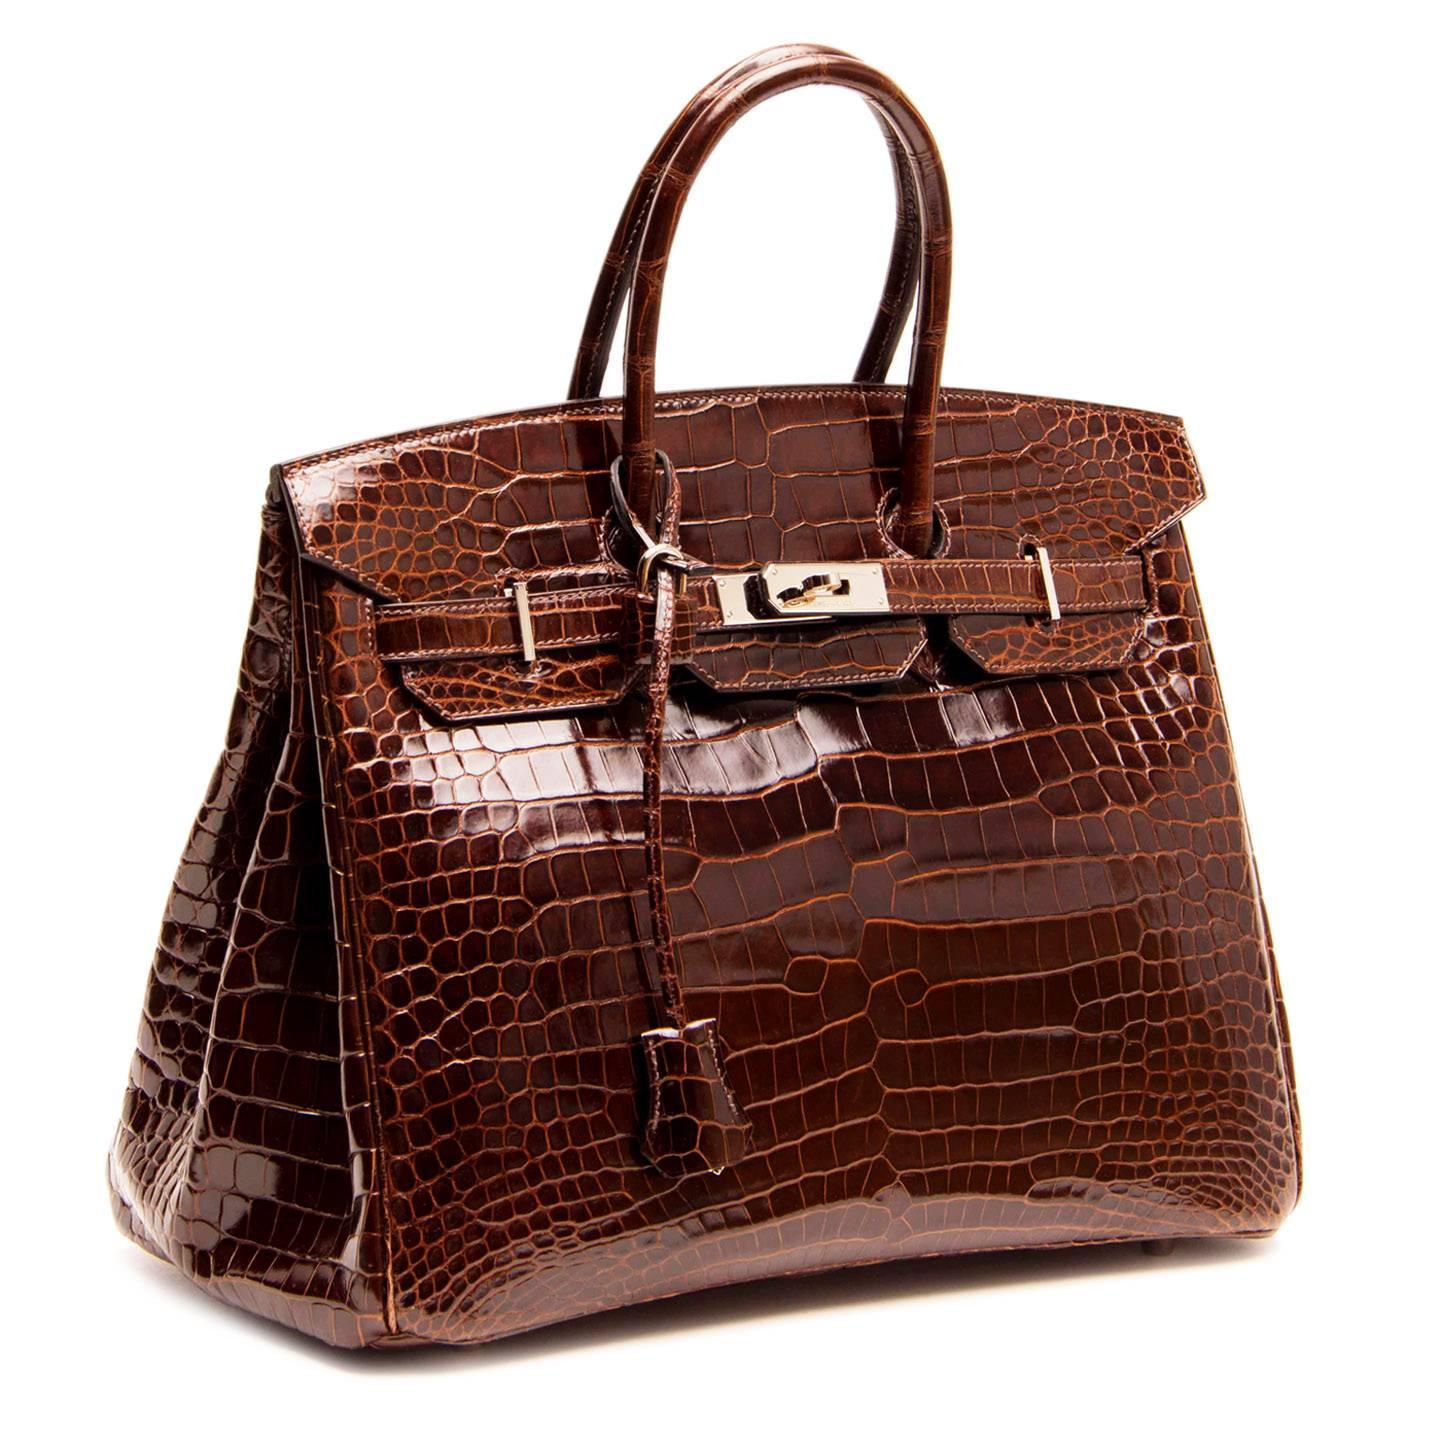 Beautiful chocolate brown crocodile Birkin 35cm bag with rolled handles and front flap that fastens with palladium turn-clasp buckle closure. This exquisite Chocolate Brown Porosus Crocodile Birkin is very rare to find in the shiny finish. Porosus,